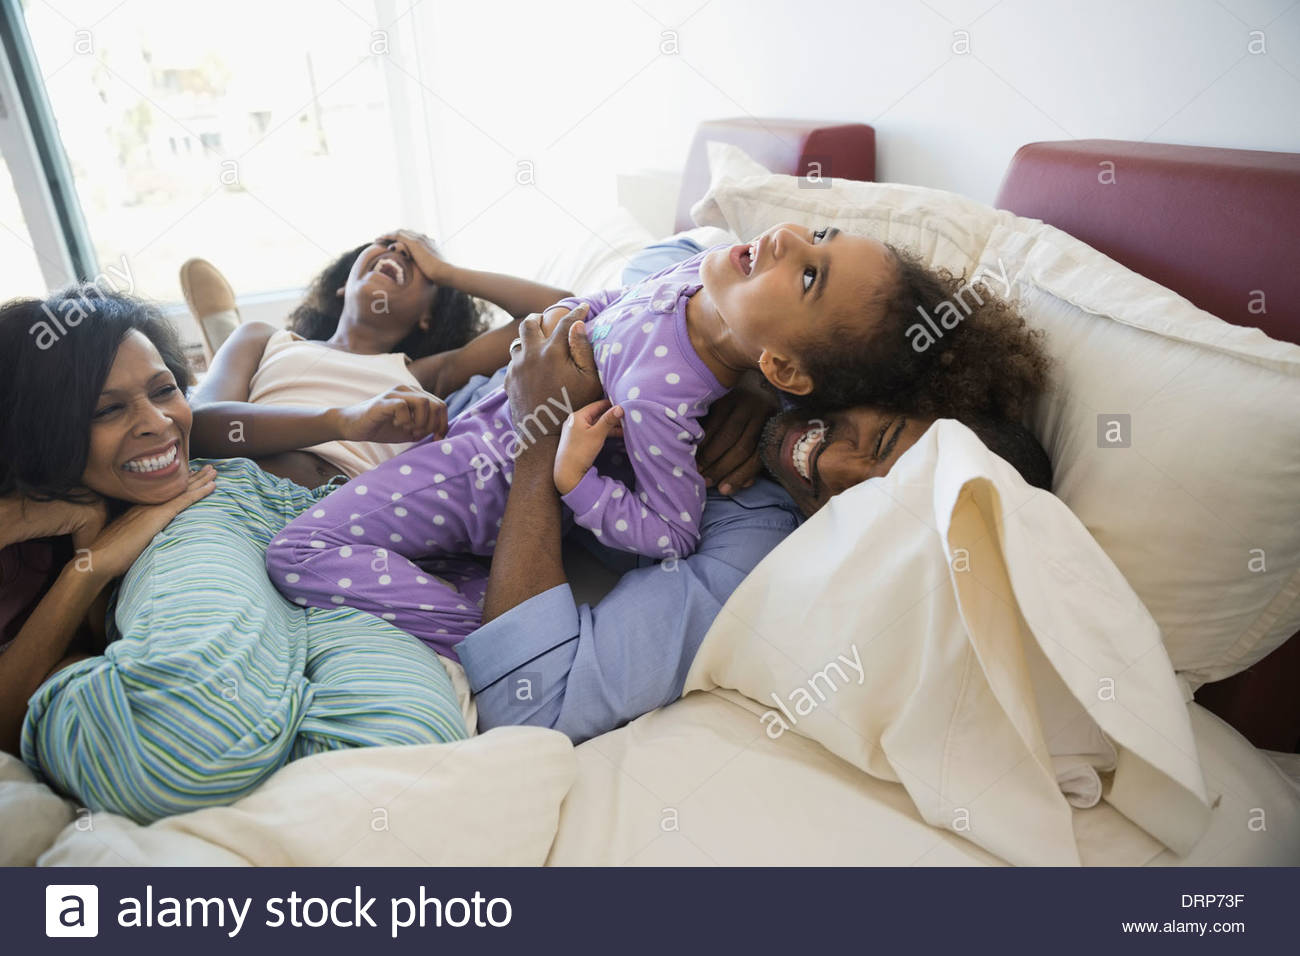 Playful family in bed Stock Photo